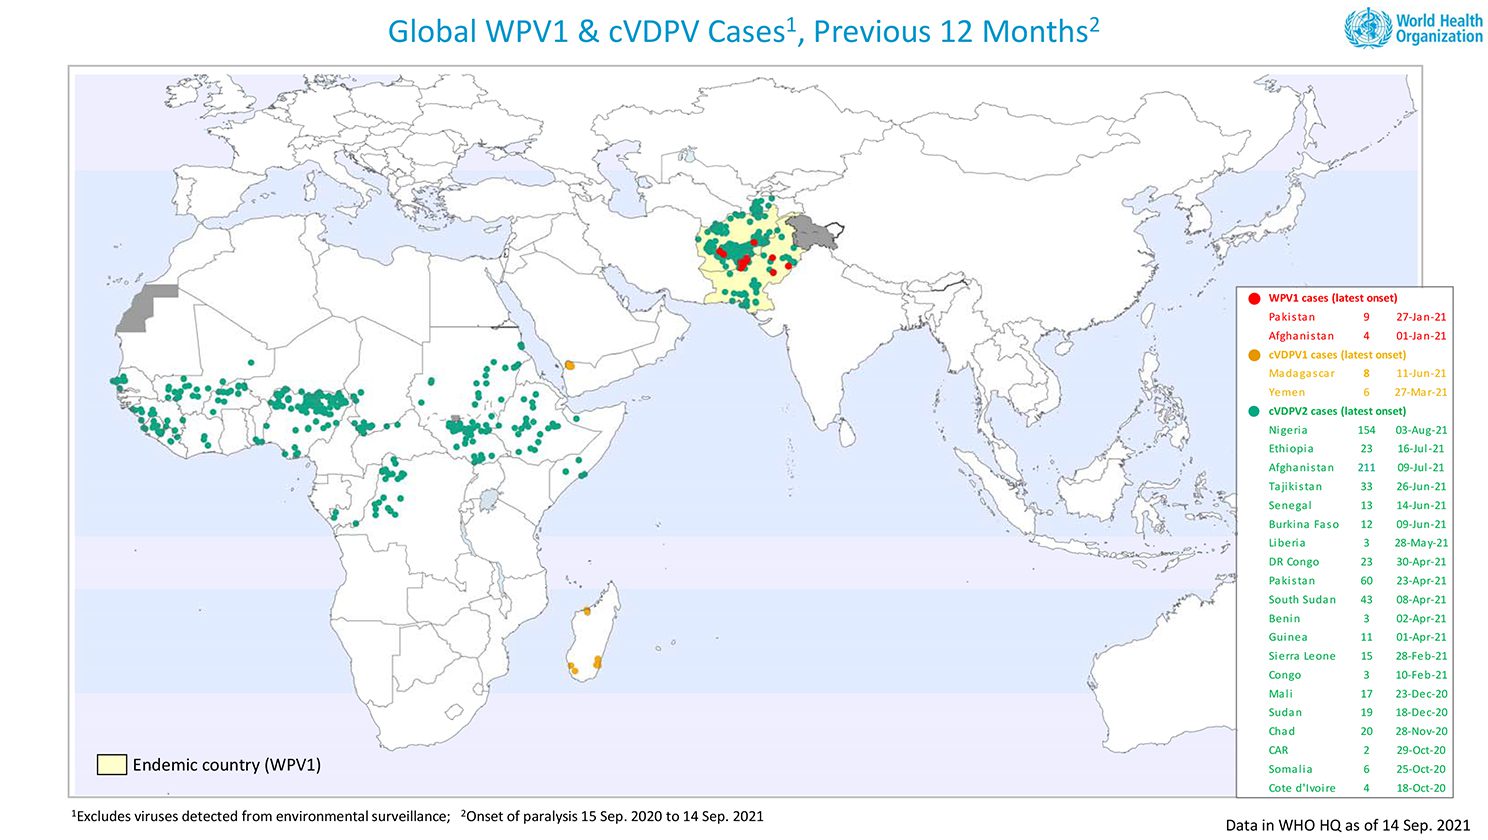 Wild Polio Cases (WPV1) and the Circulating Vaccine Derived (cVDPV) Cases